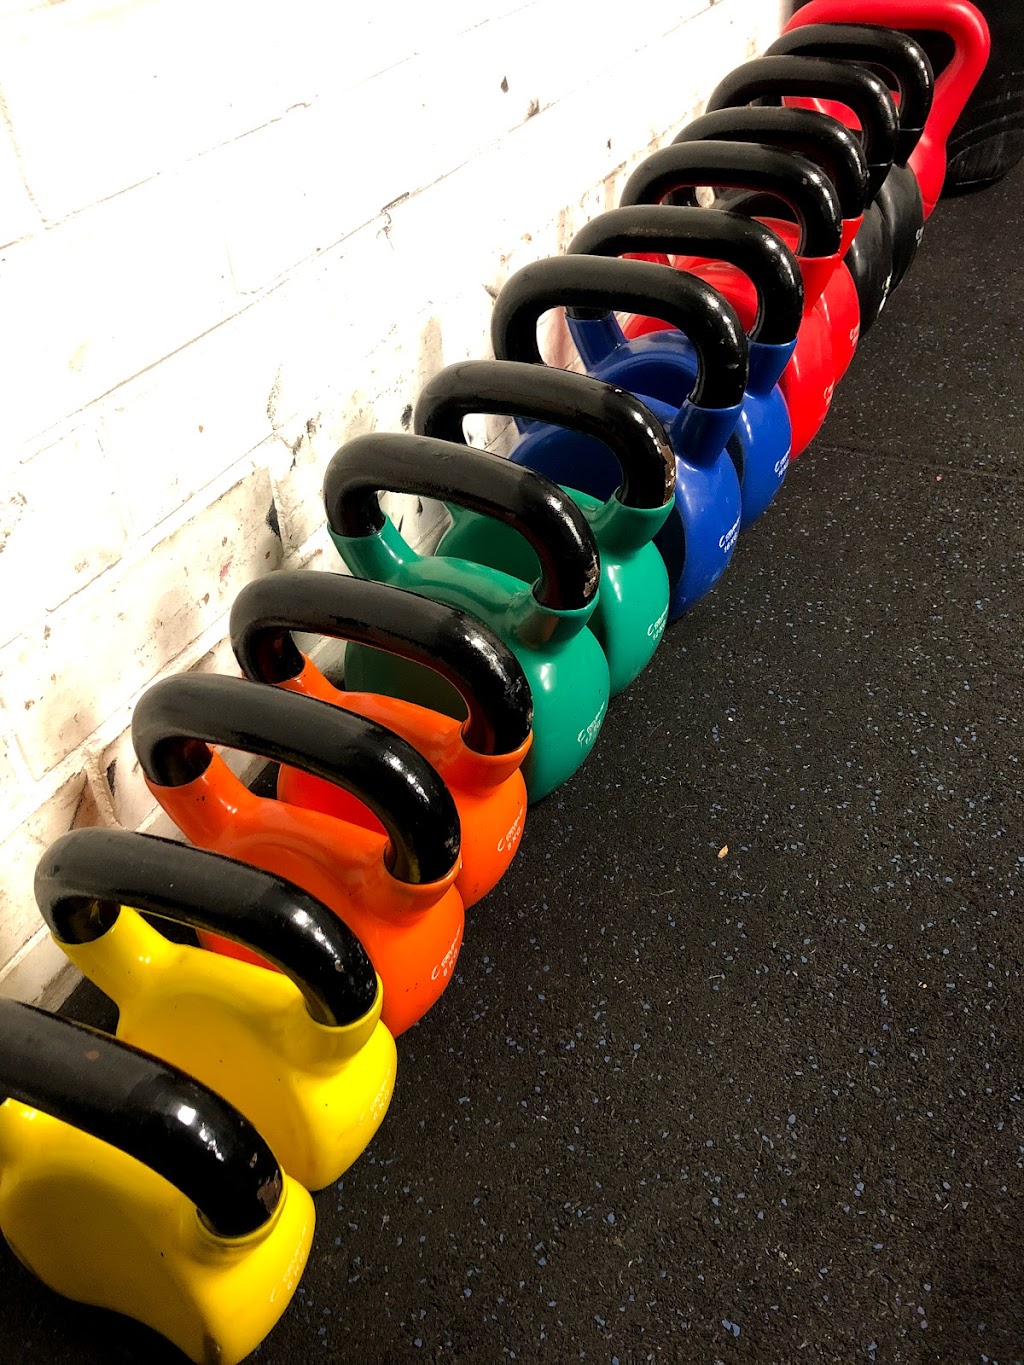 New Line Fitness | 6 Duffy Ave, Thornleigh NSW 2120, Australia | Phone: 0406 868 119